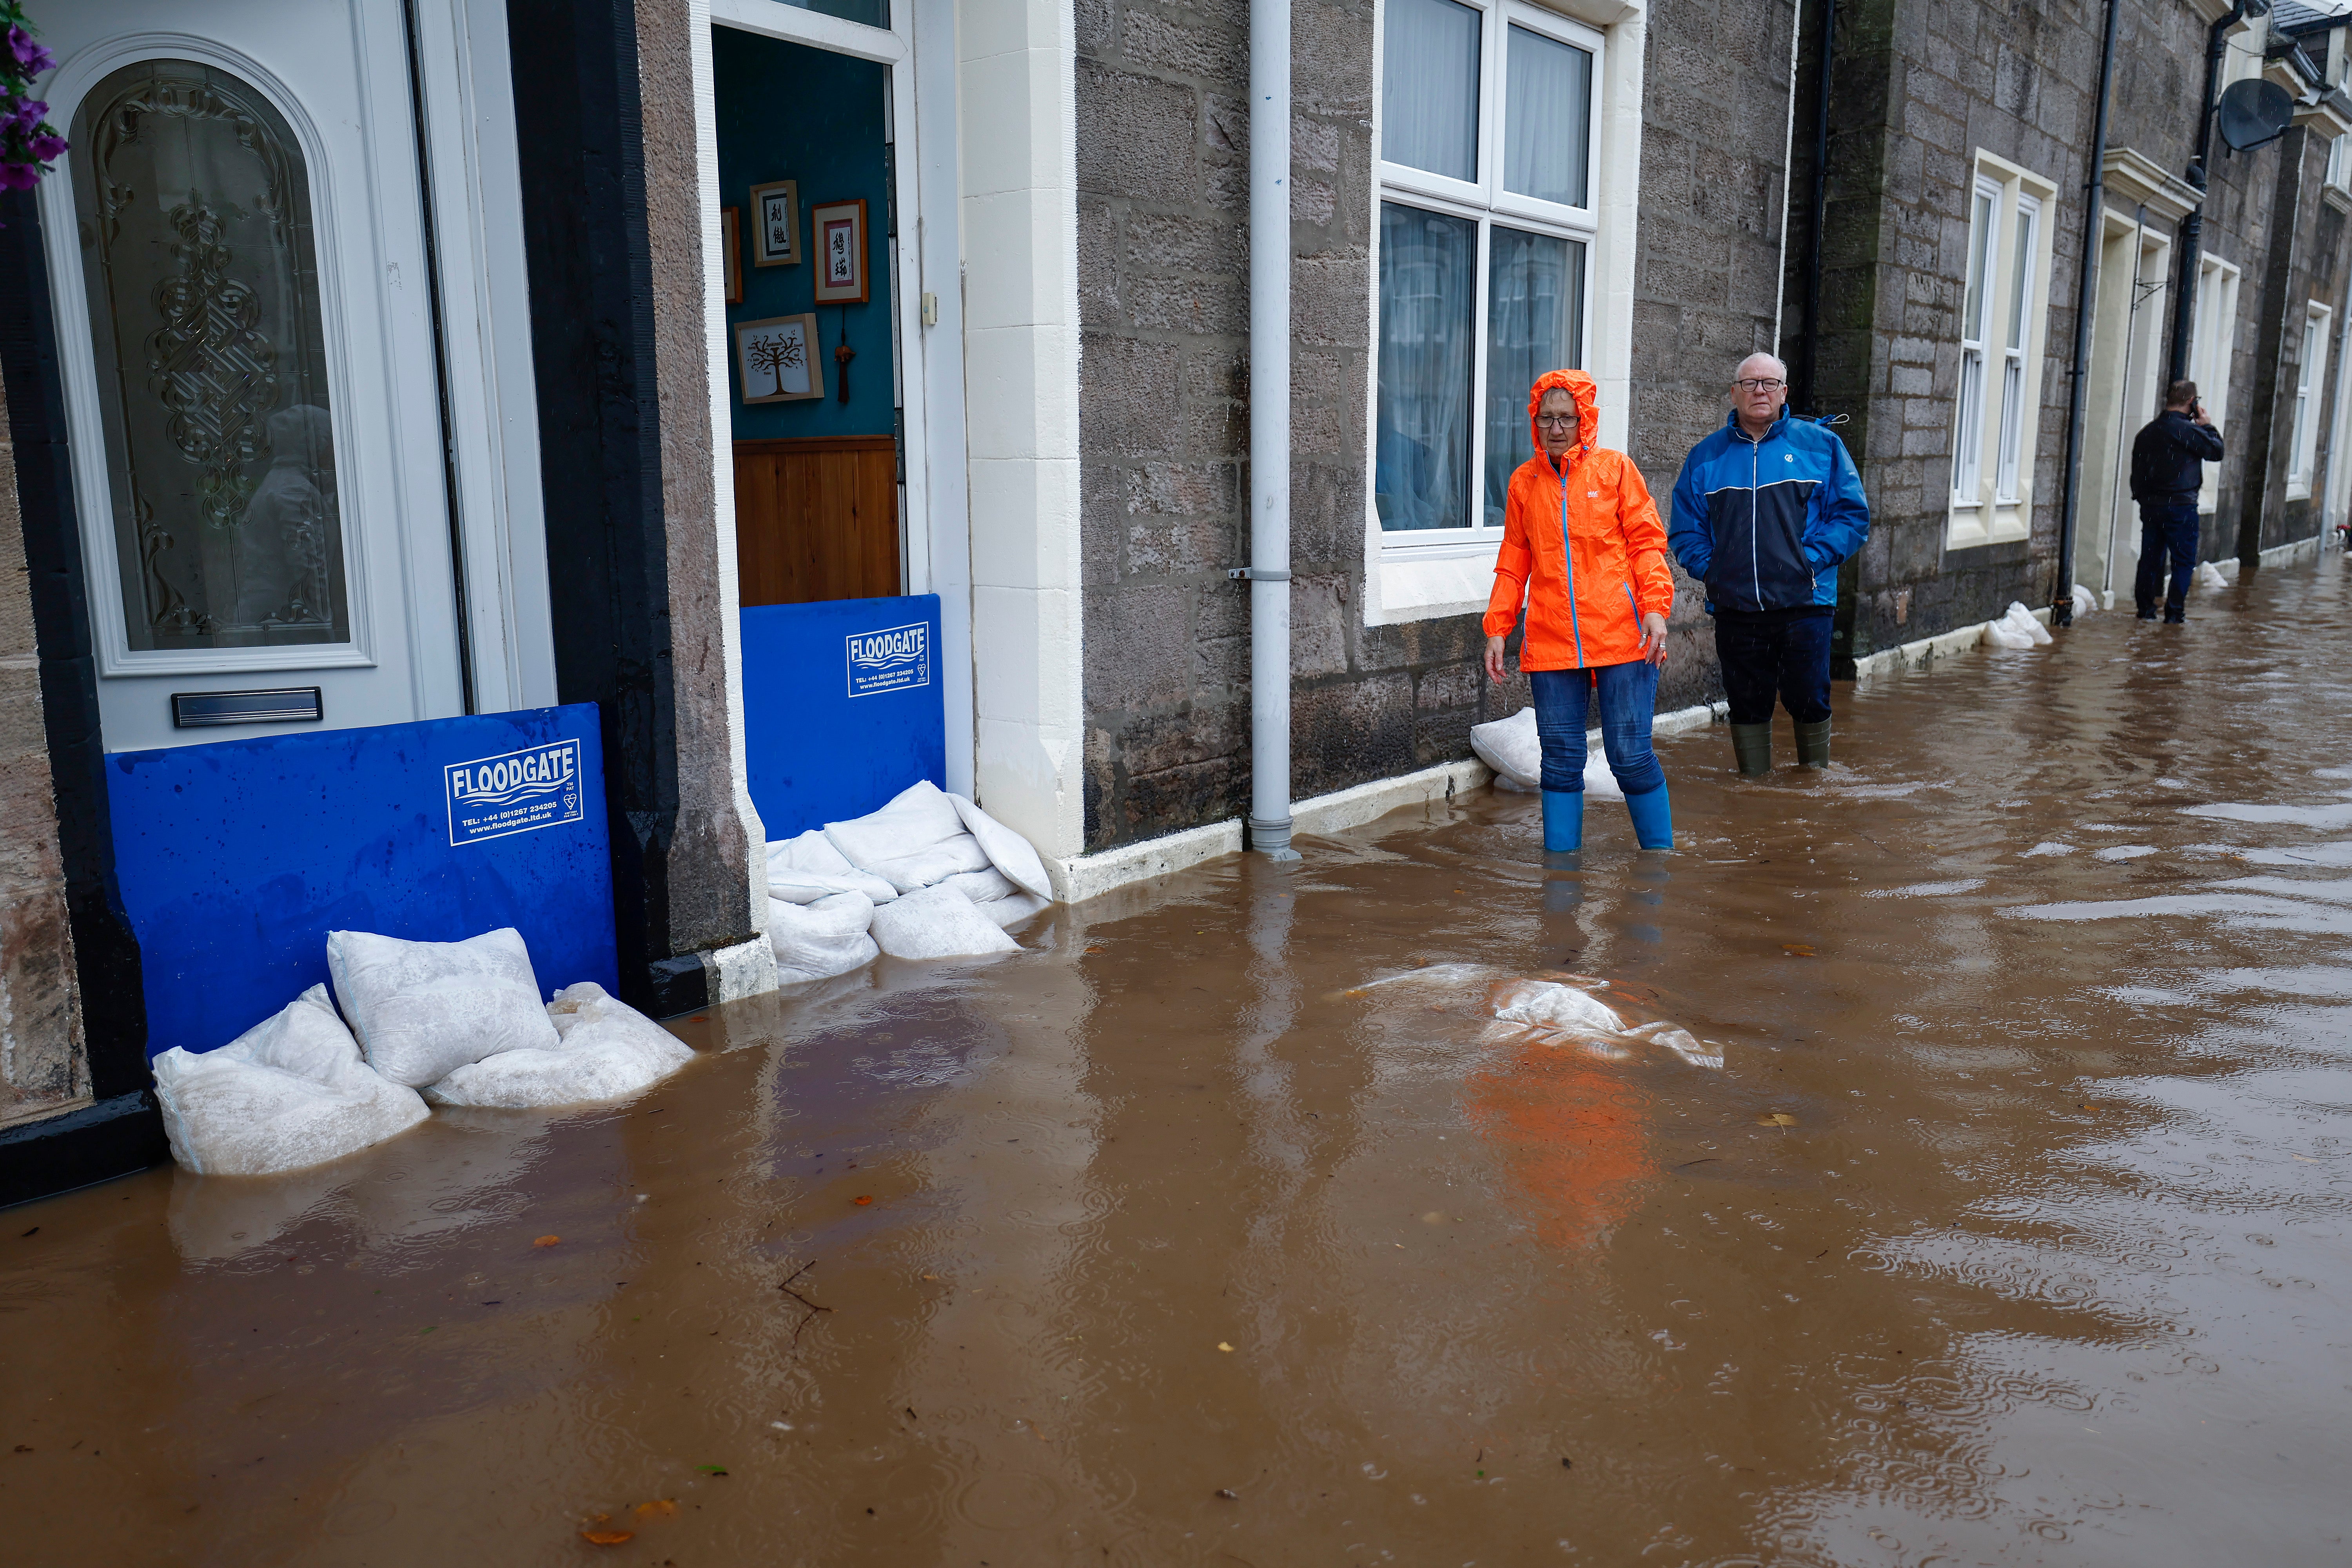 pMembers of the public struggle with flooding as torrential rain continues in Dumbarton/p